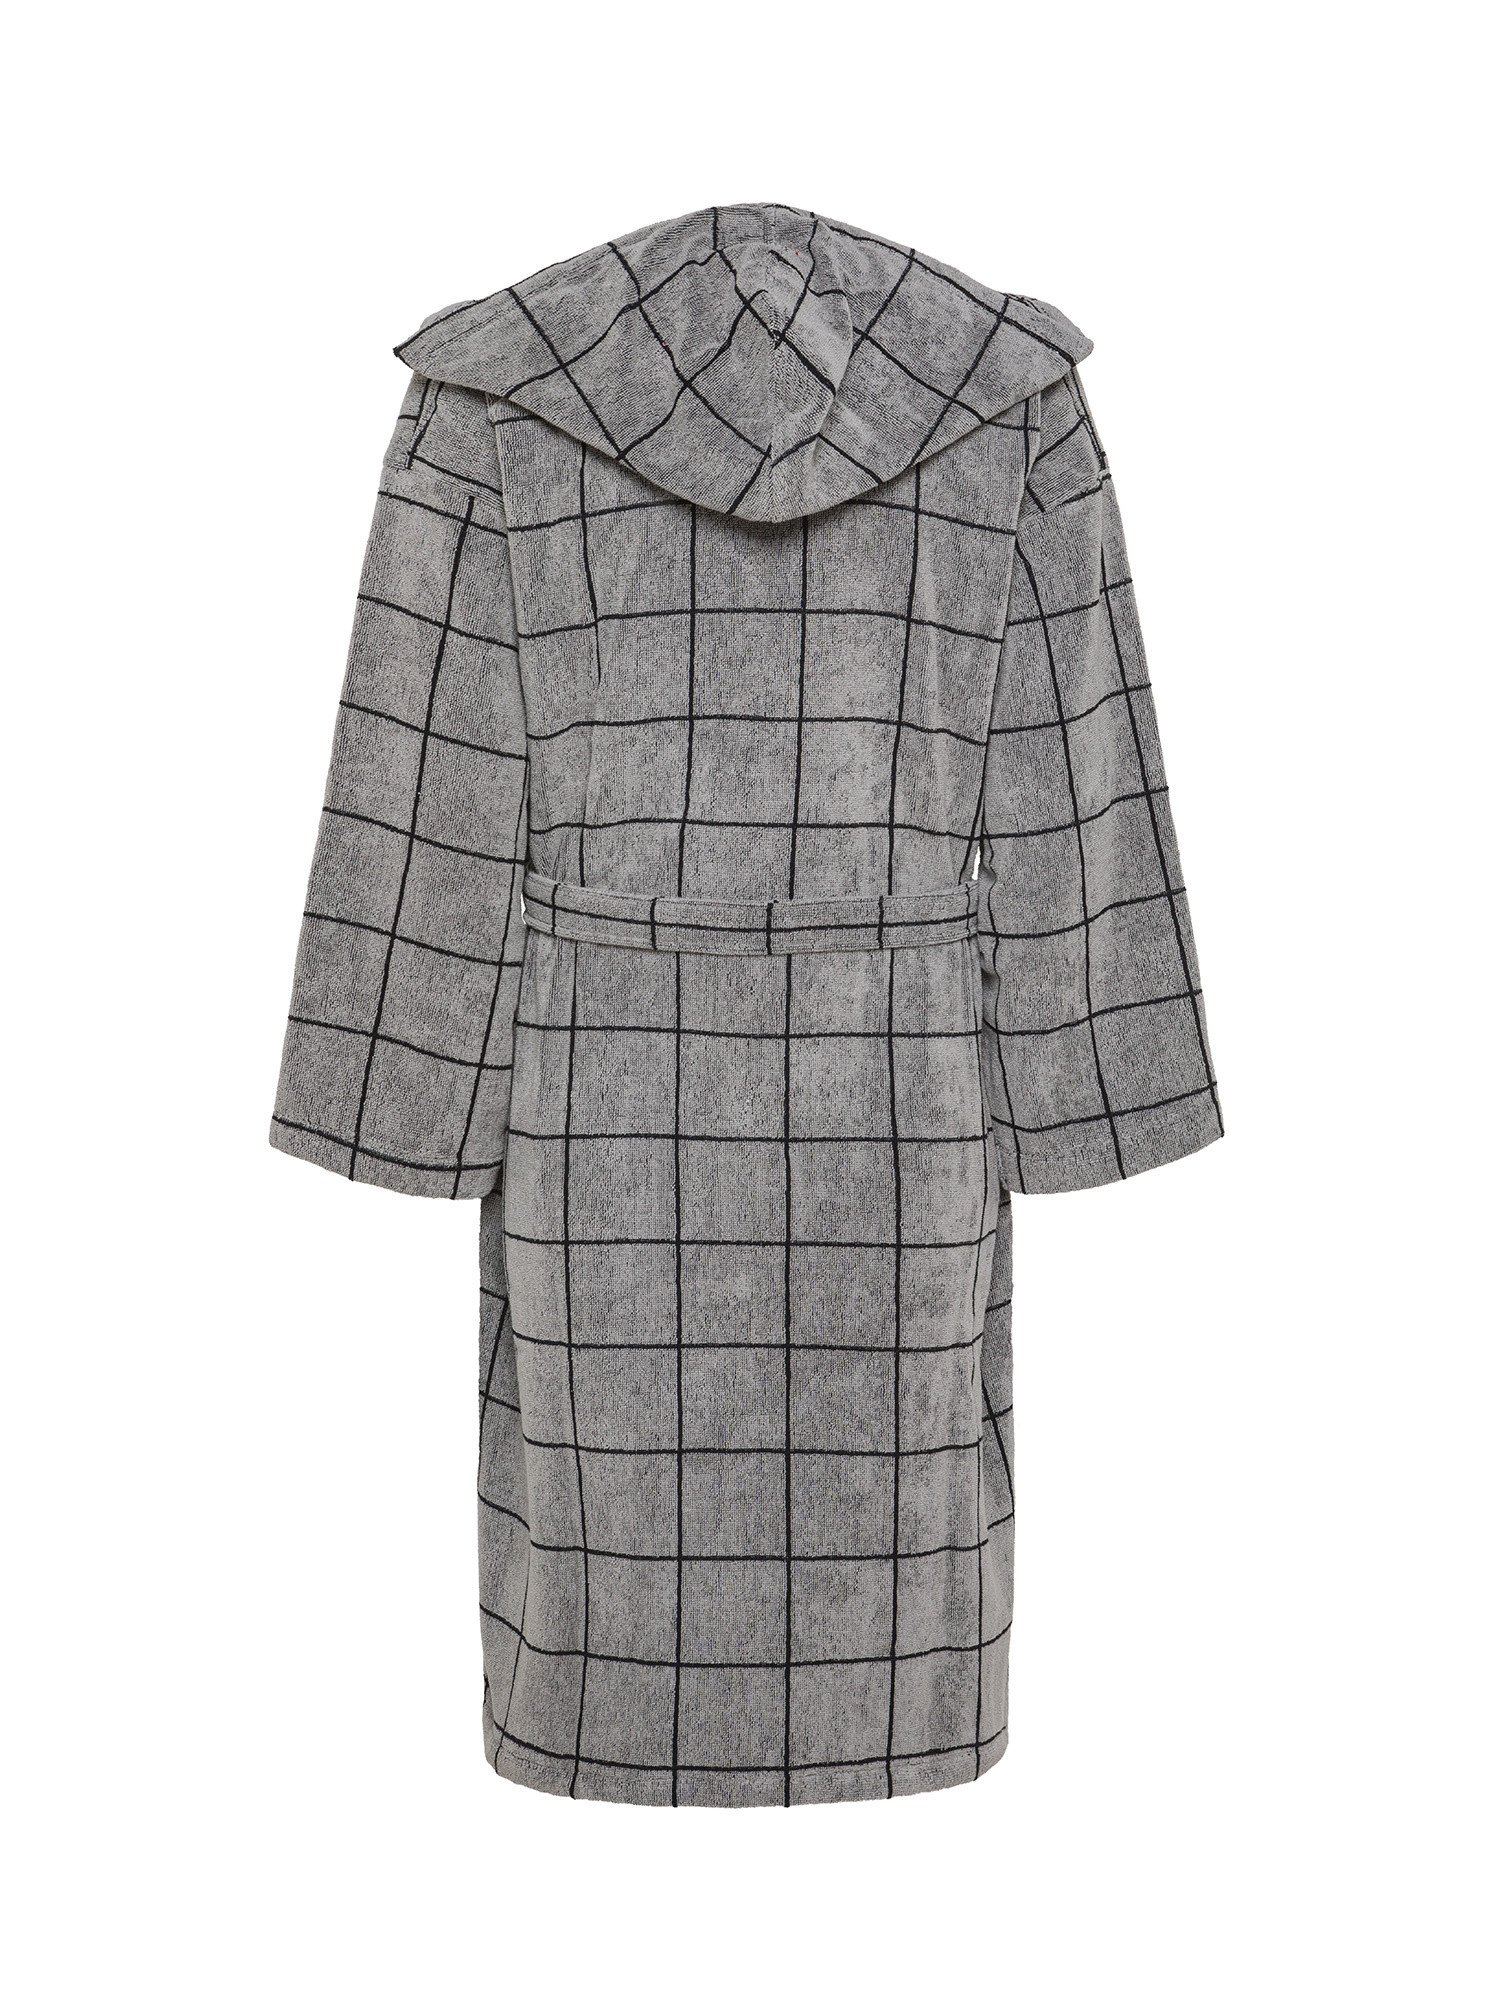 Bathrobe with hood in checked jacquard pure cotton terry, Black, large image number 1